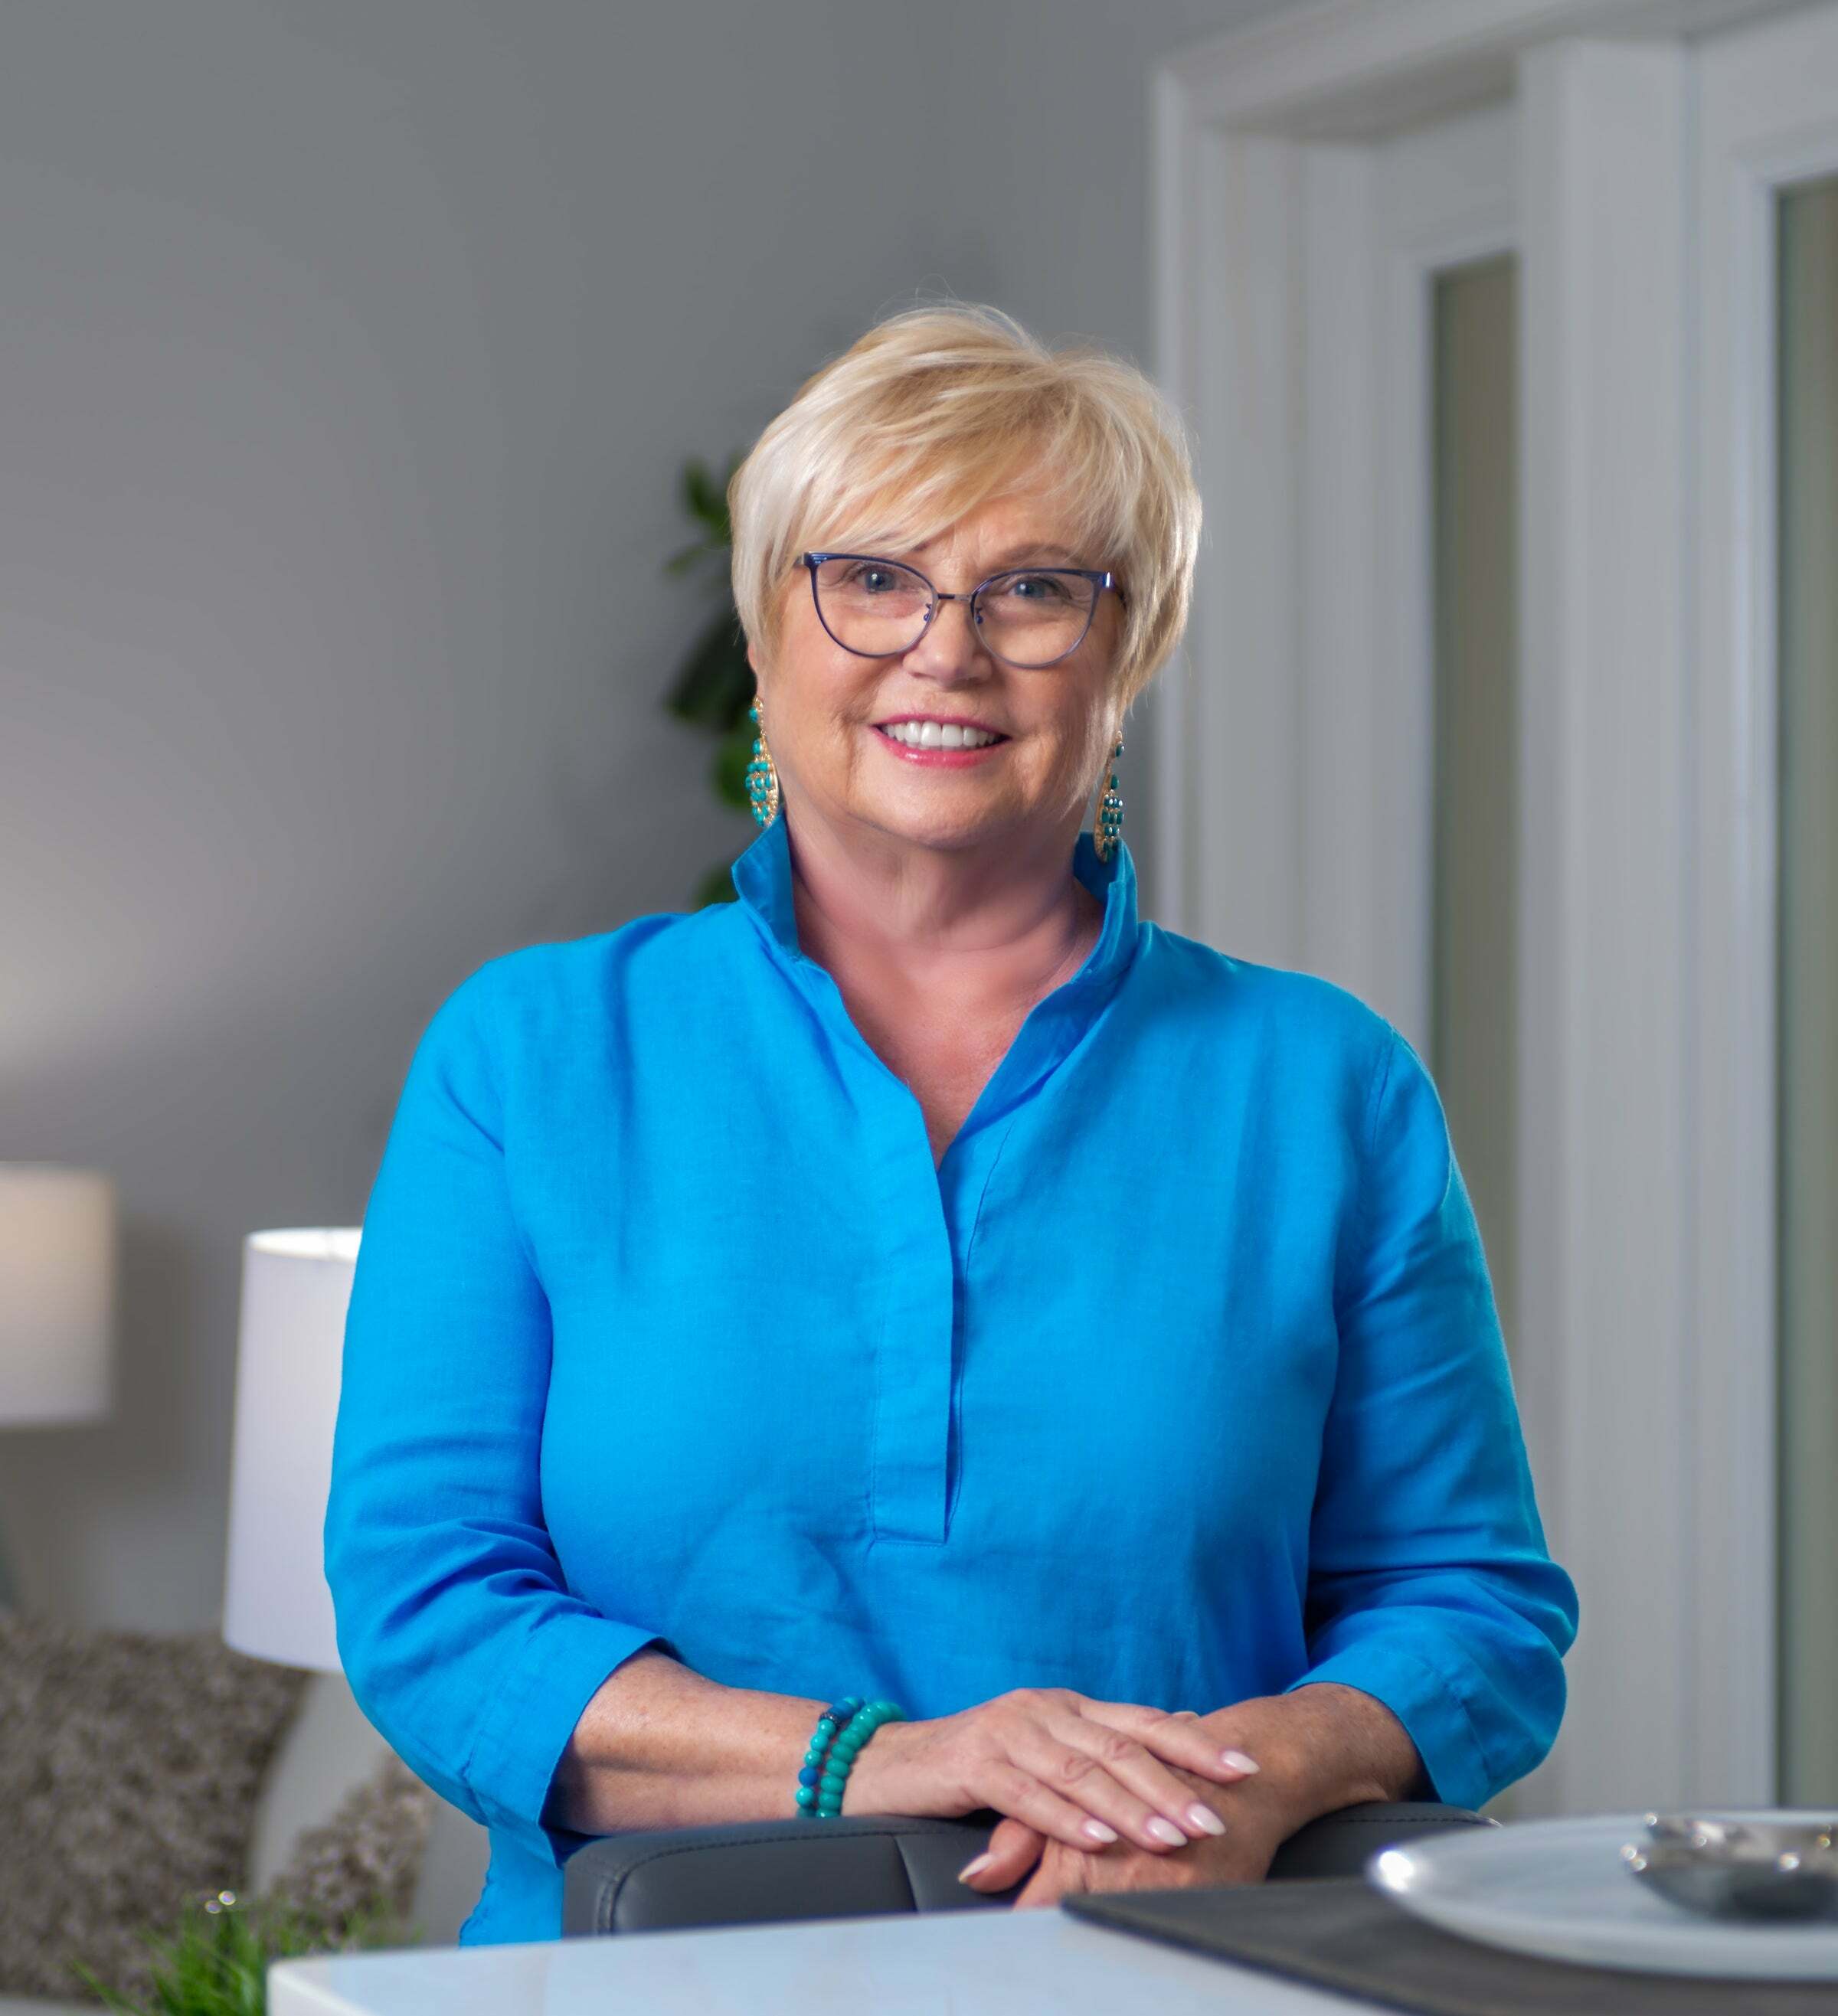 Patti Reid, Real Estate Salesperson in Lakewood Ranch, Atchley Properties